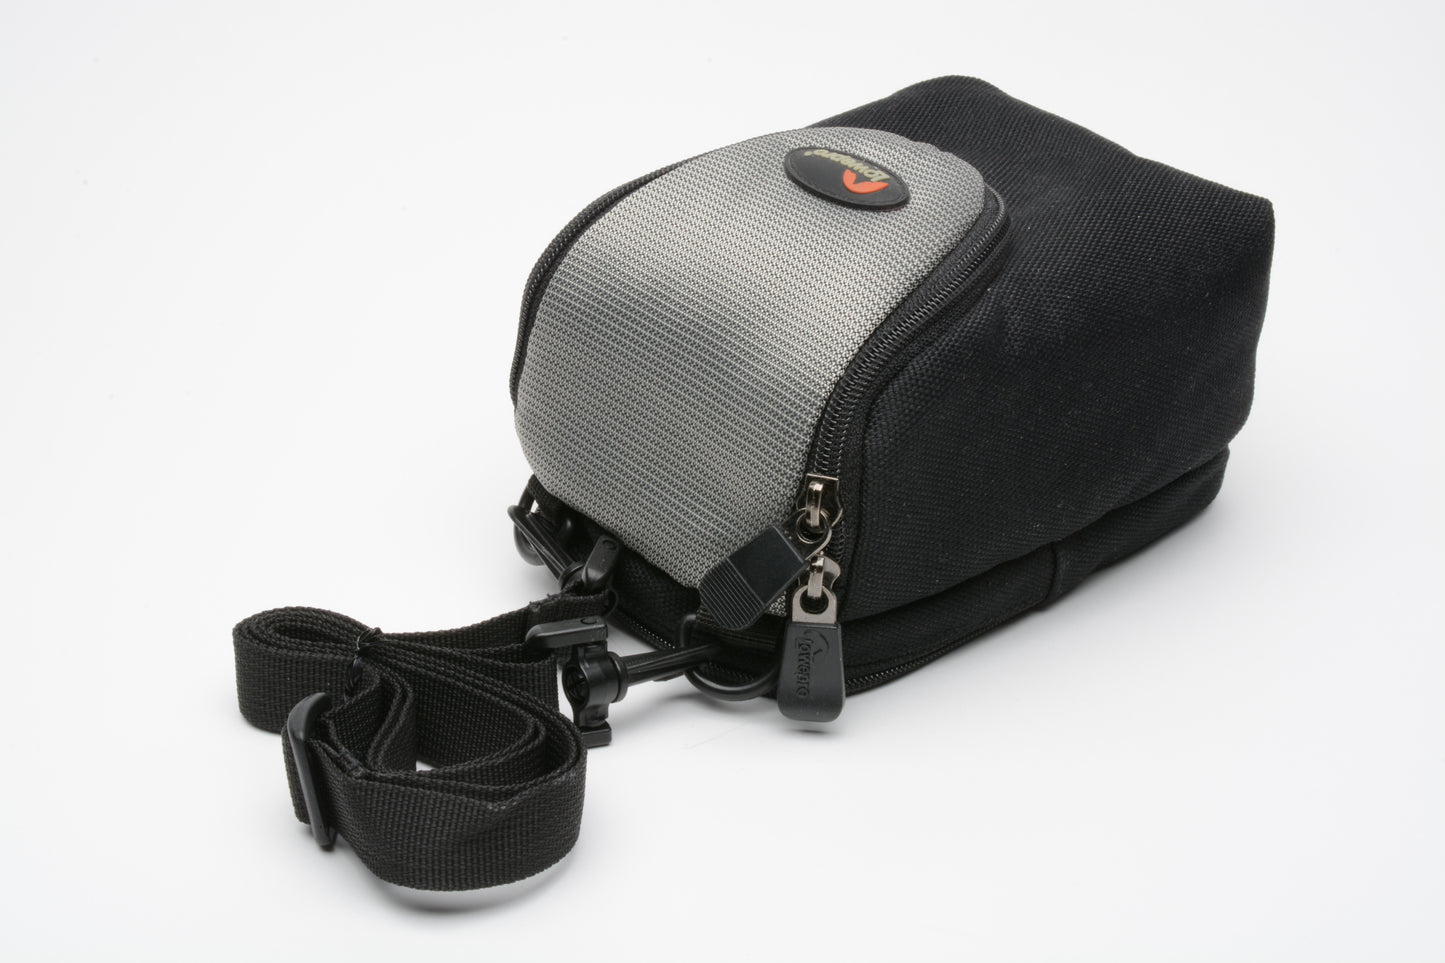 Lowepro D-Res 200AW padded camera case, Never used